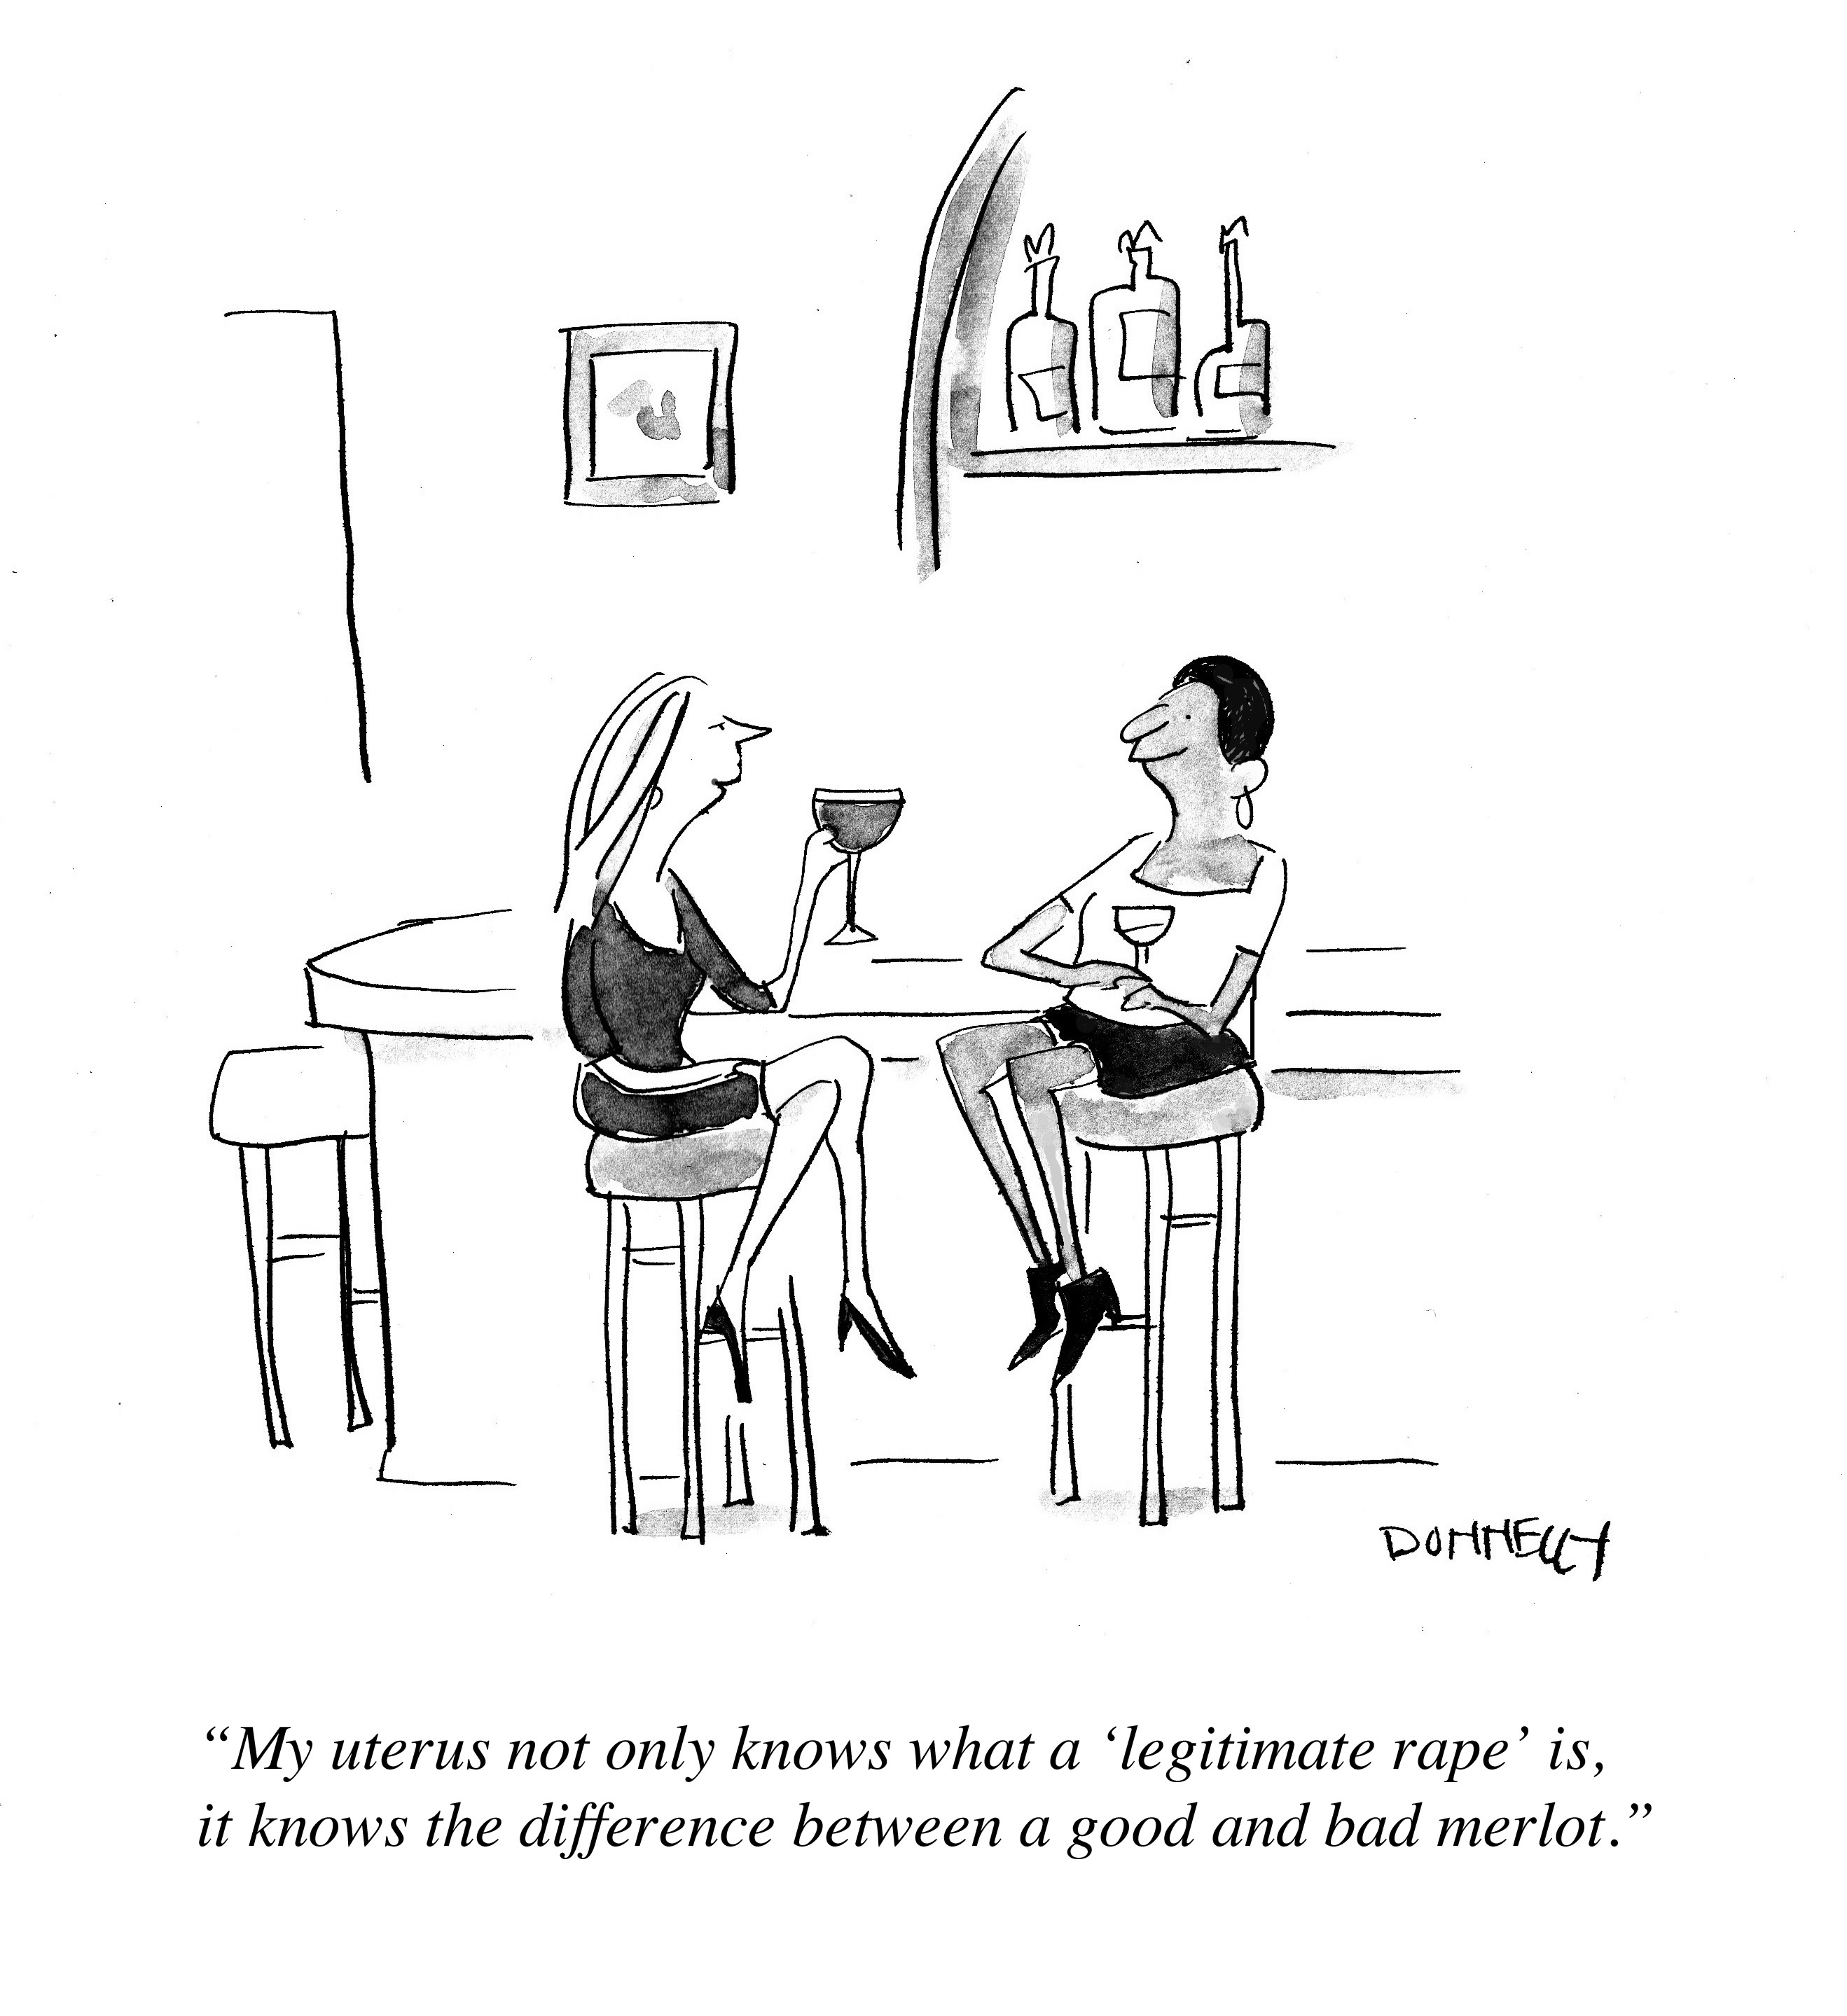 When Do They Serve The Wine? | About laughing at ourselves, and more. | Page 82637 x 2879